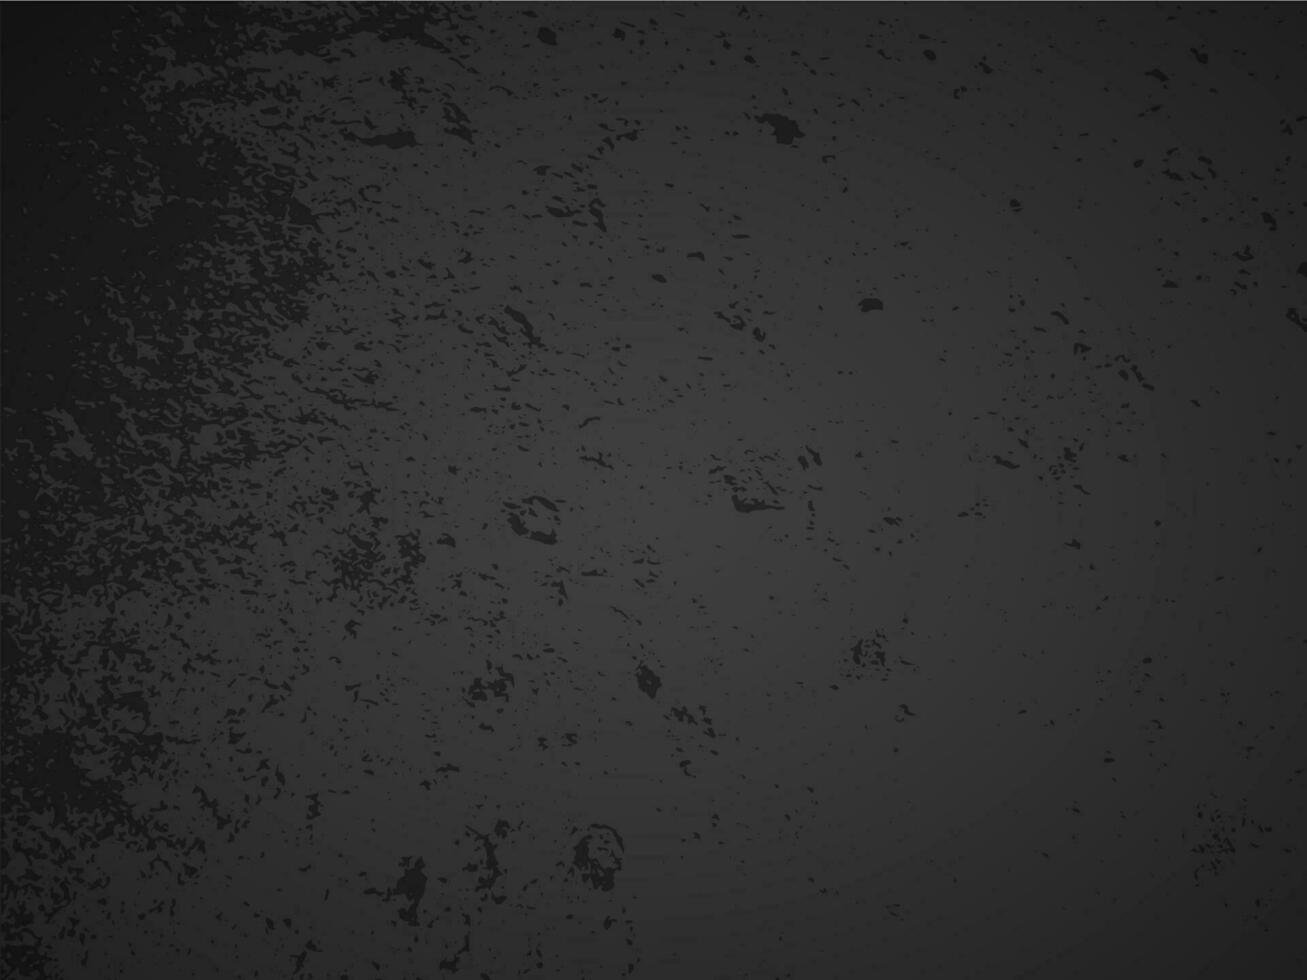 Grunge grainy dirty texture. Dark scratched distress abstract urban overlay background. Vector illustration